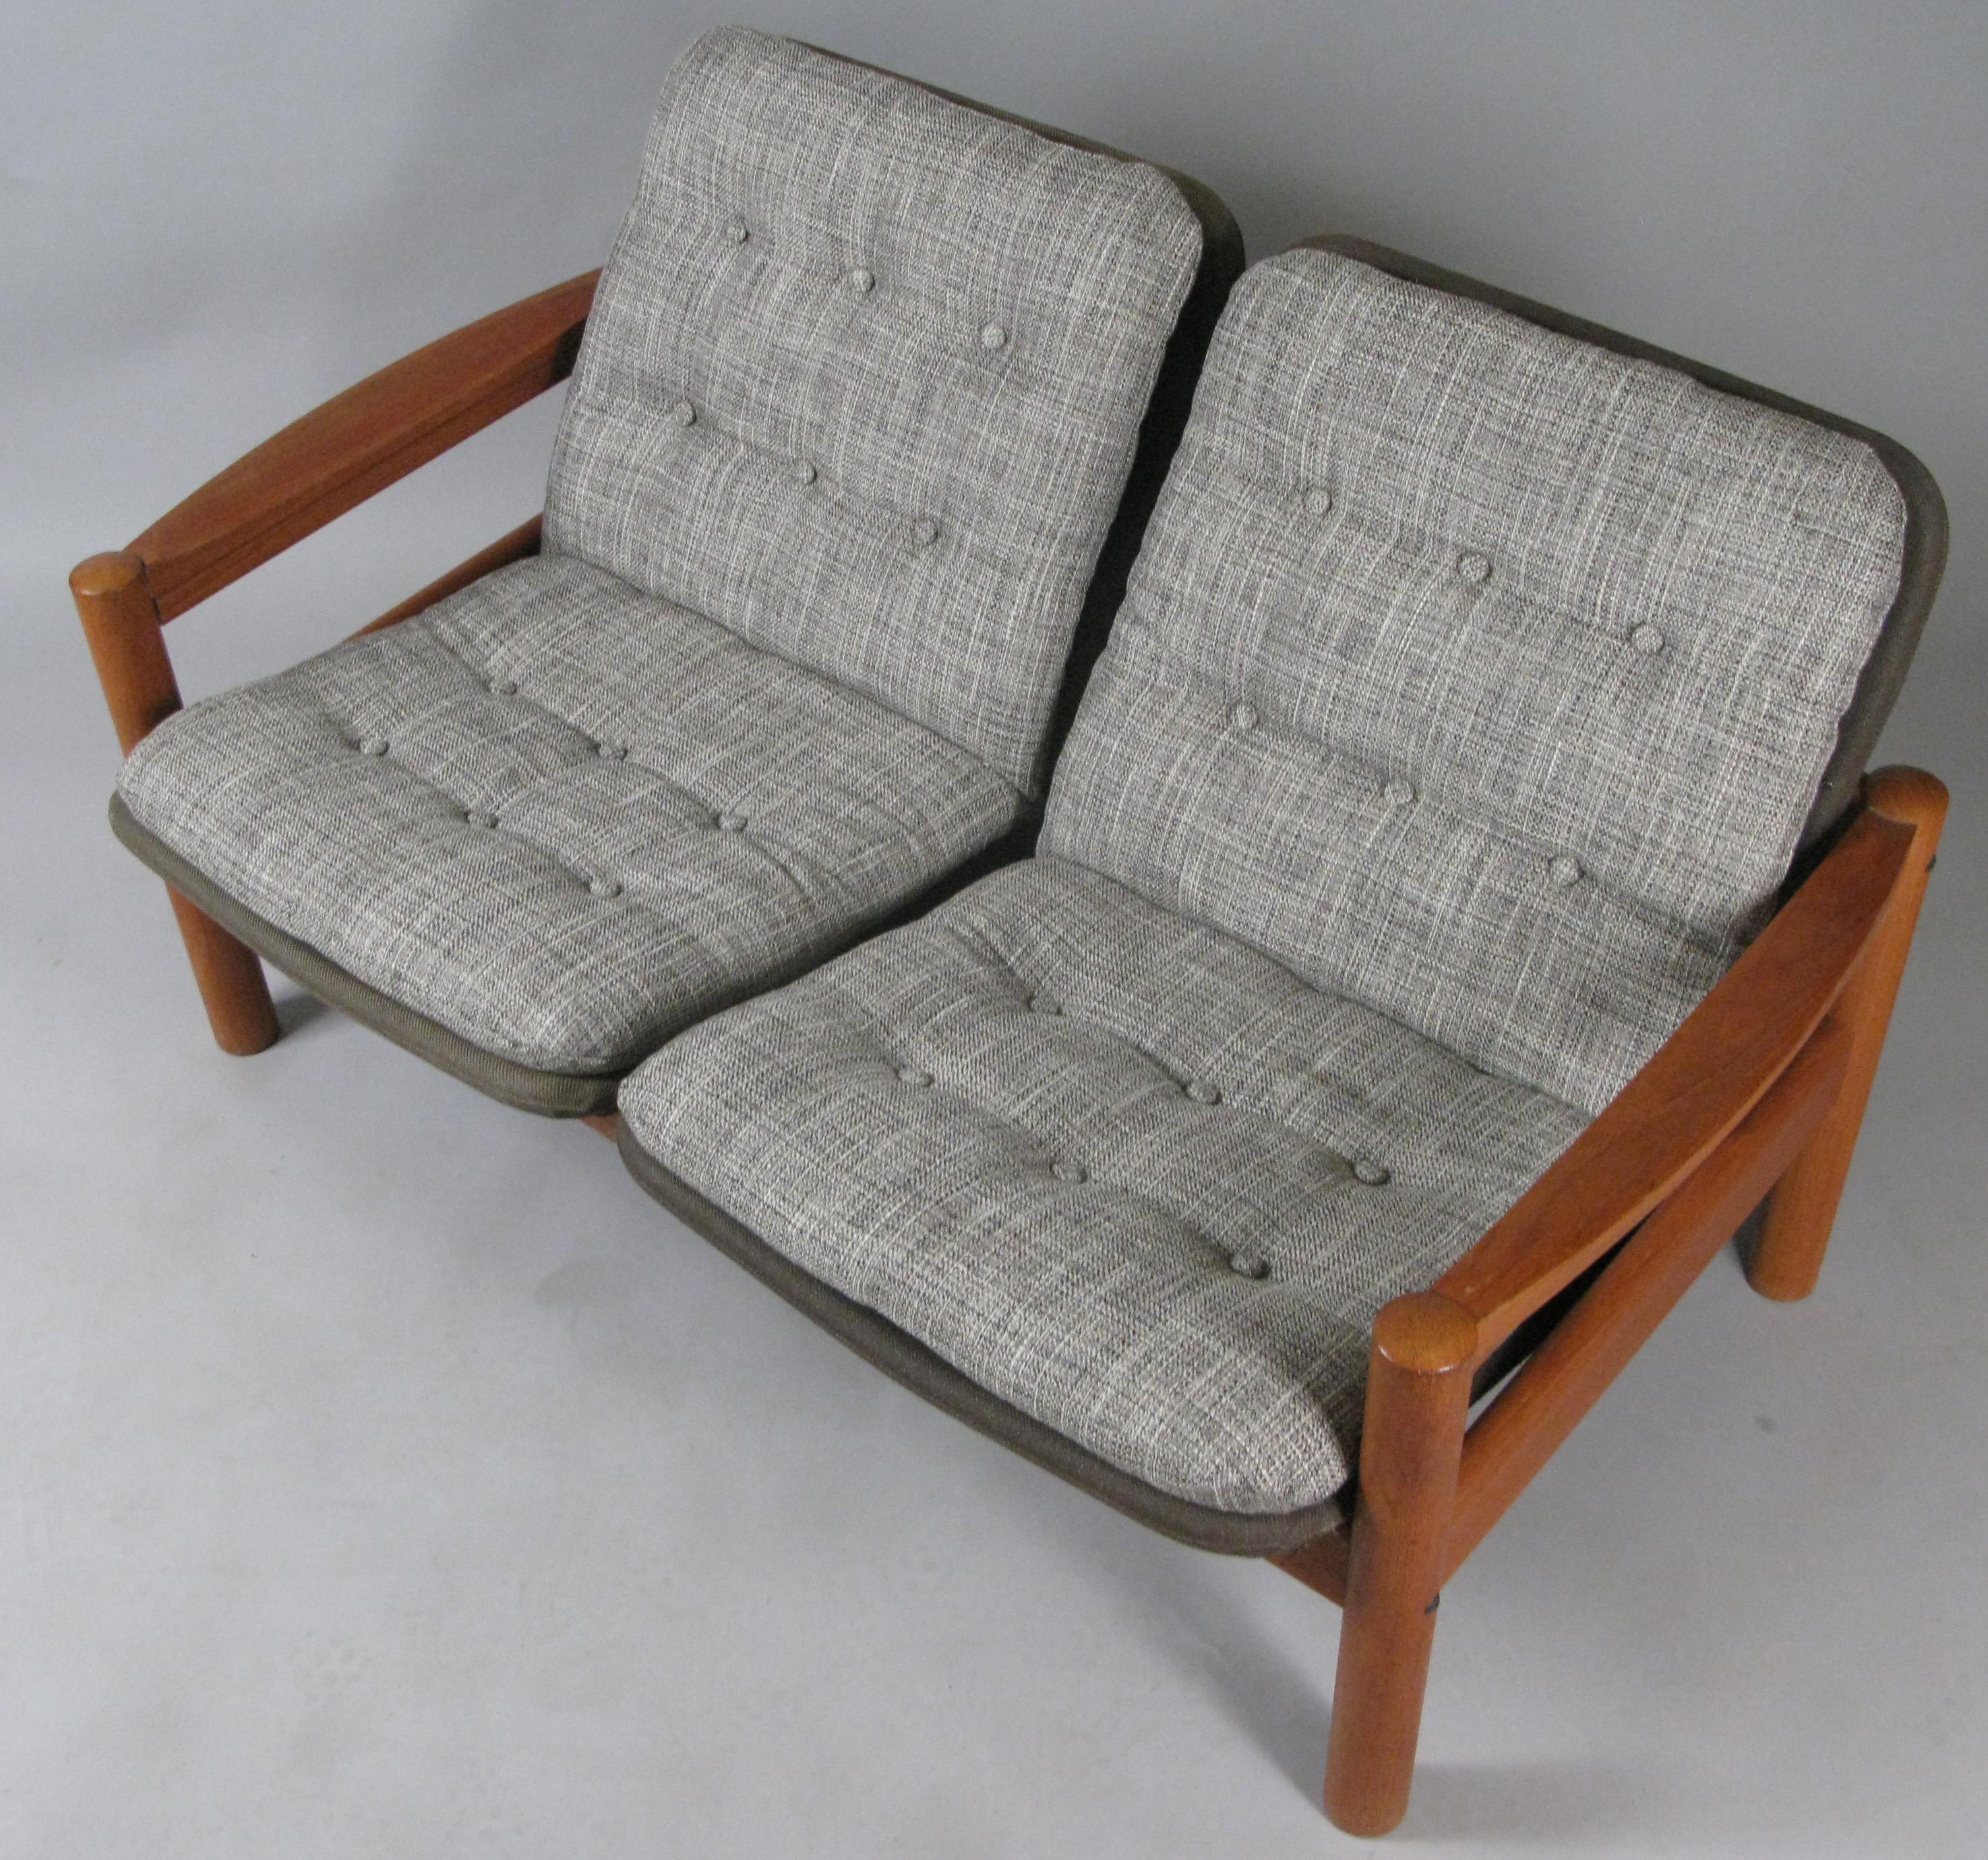 A very handsome solid teak vintage 1970s two-seat settee made by Domino Mobler. With it's original brown linen covered seat frames, and newly upholstered button tufted seat covers in a woven grey and cream. Very stylish and comfortable. This listing